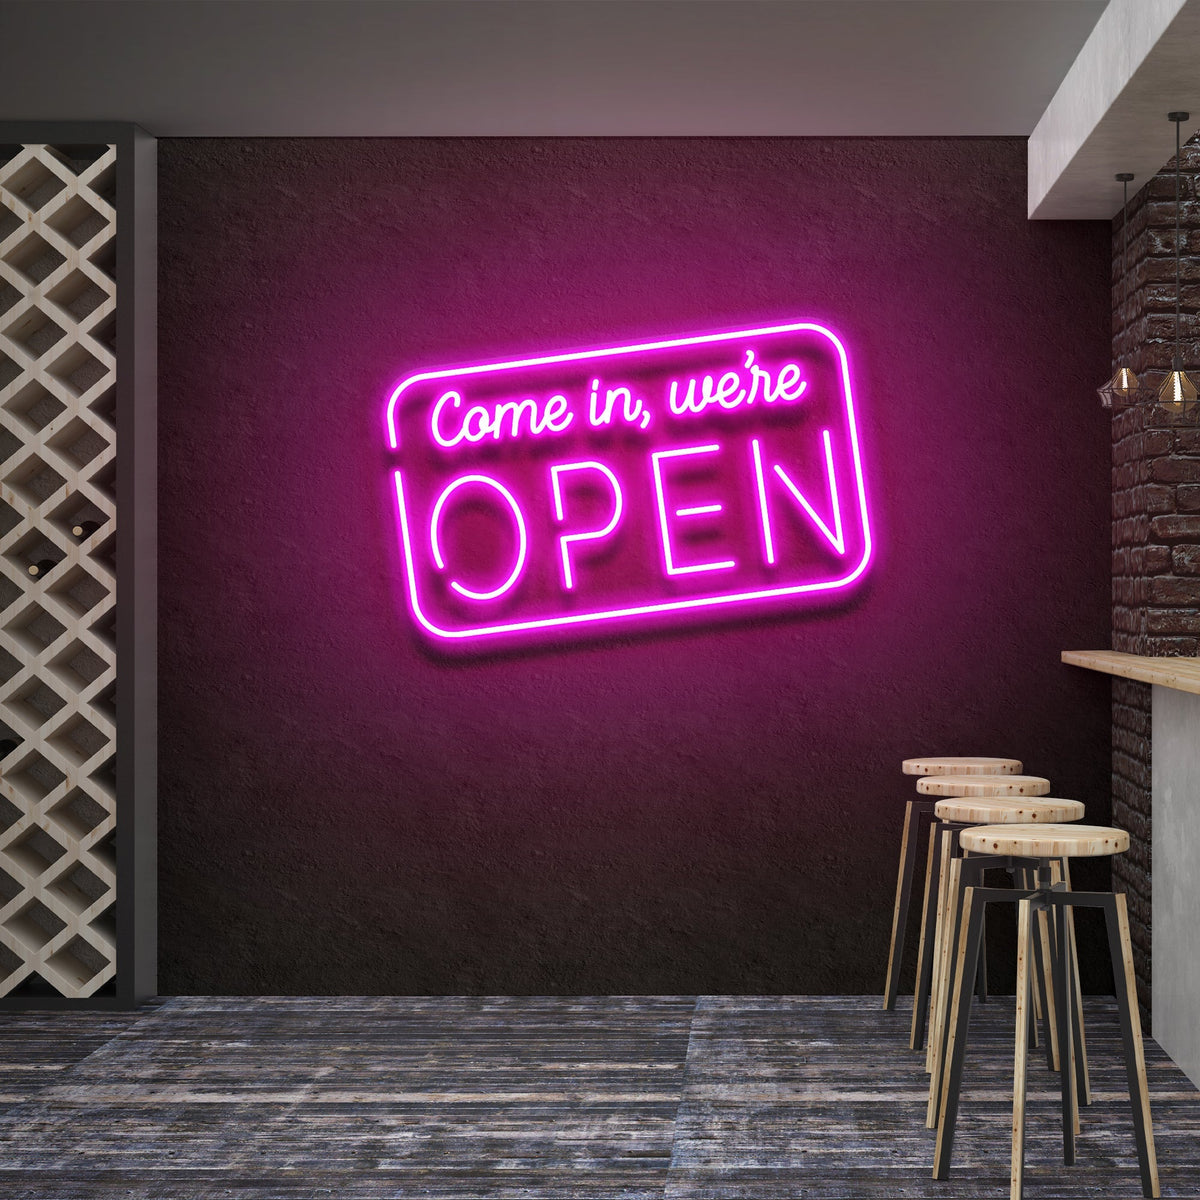 Come In, We're Open 2 Led Neon Sign Light